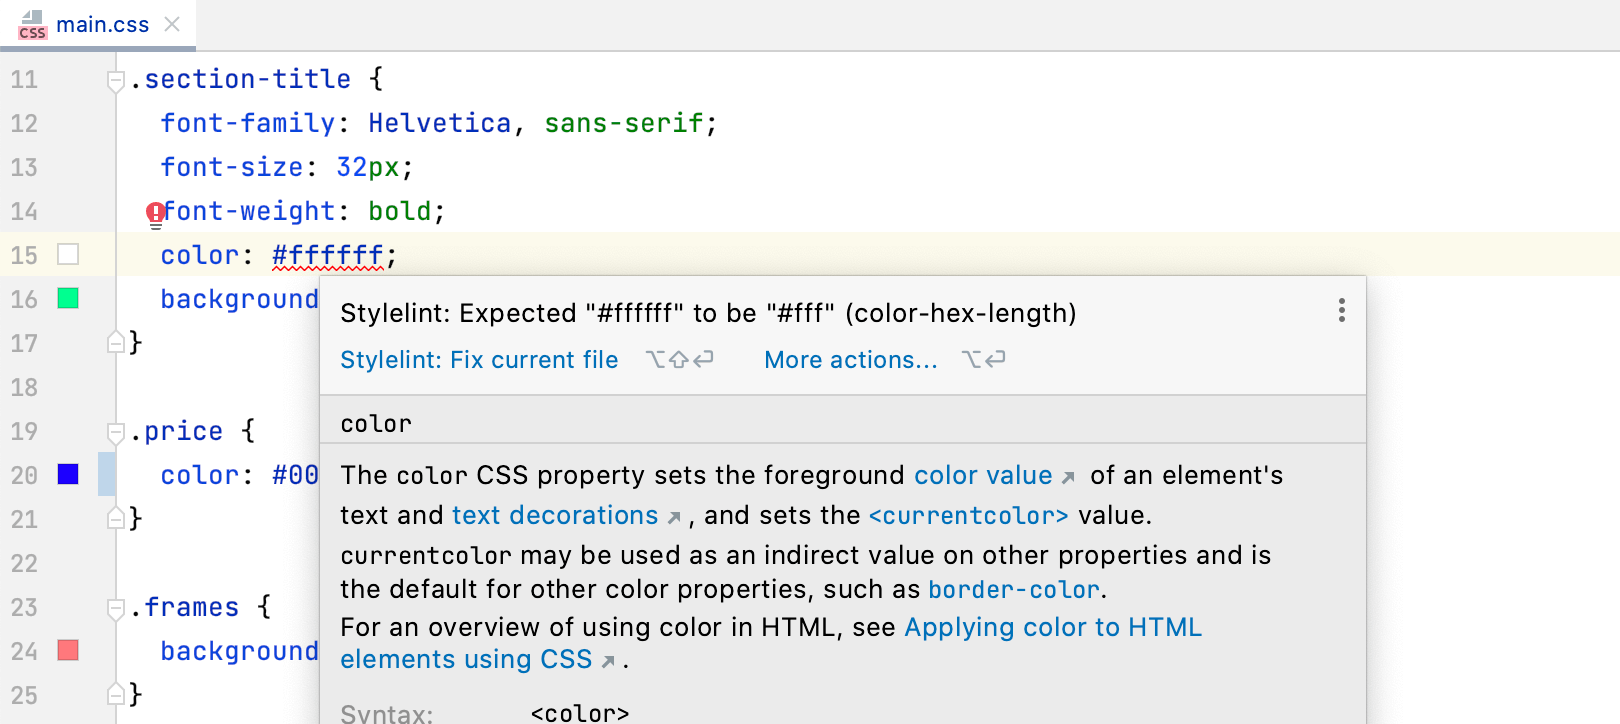 Improved support for Stylelint